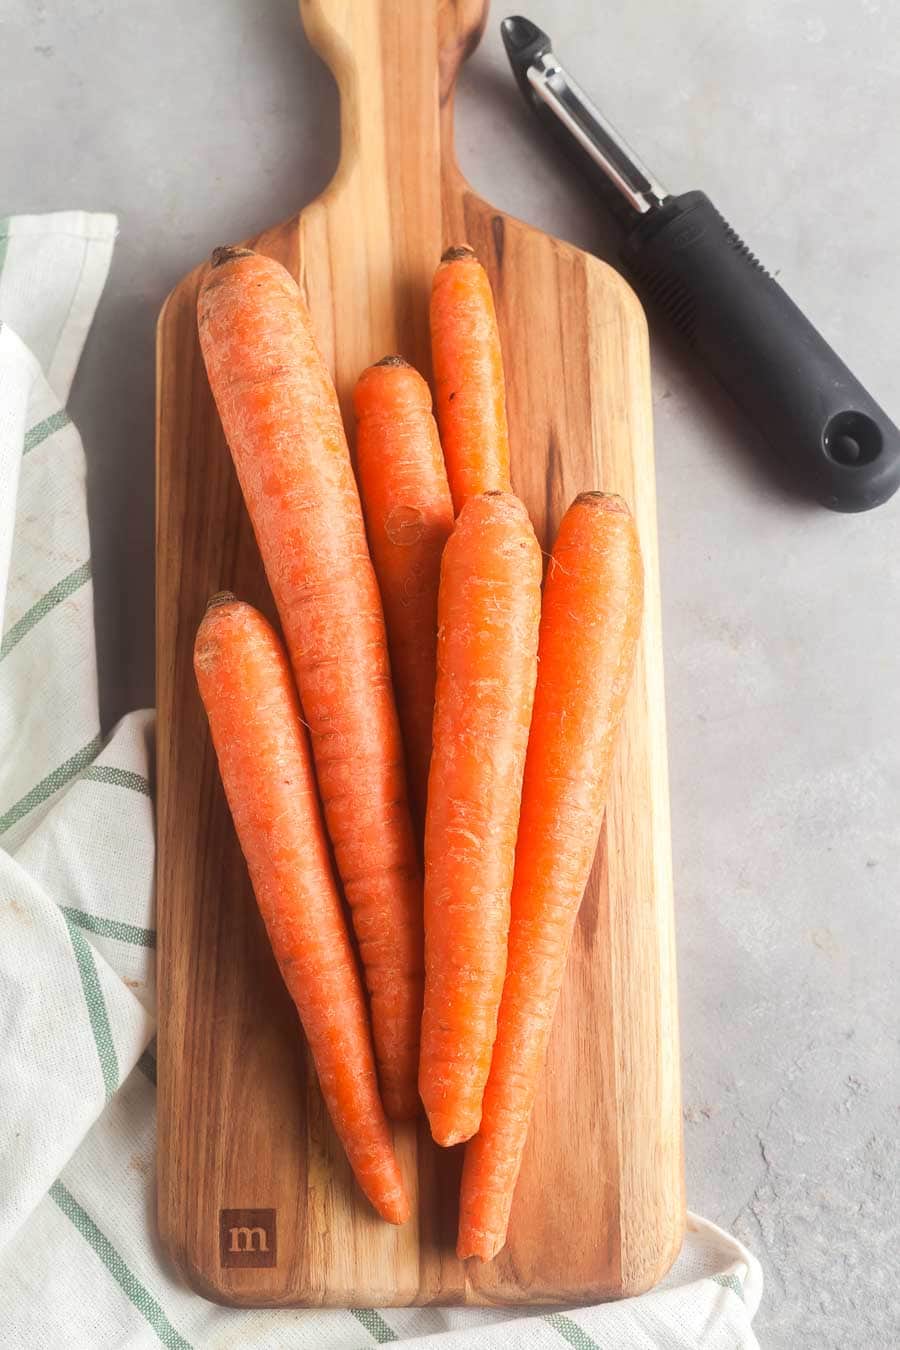 Carrots on a cutting board, ready to be peeled.